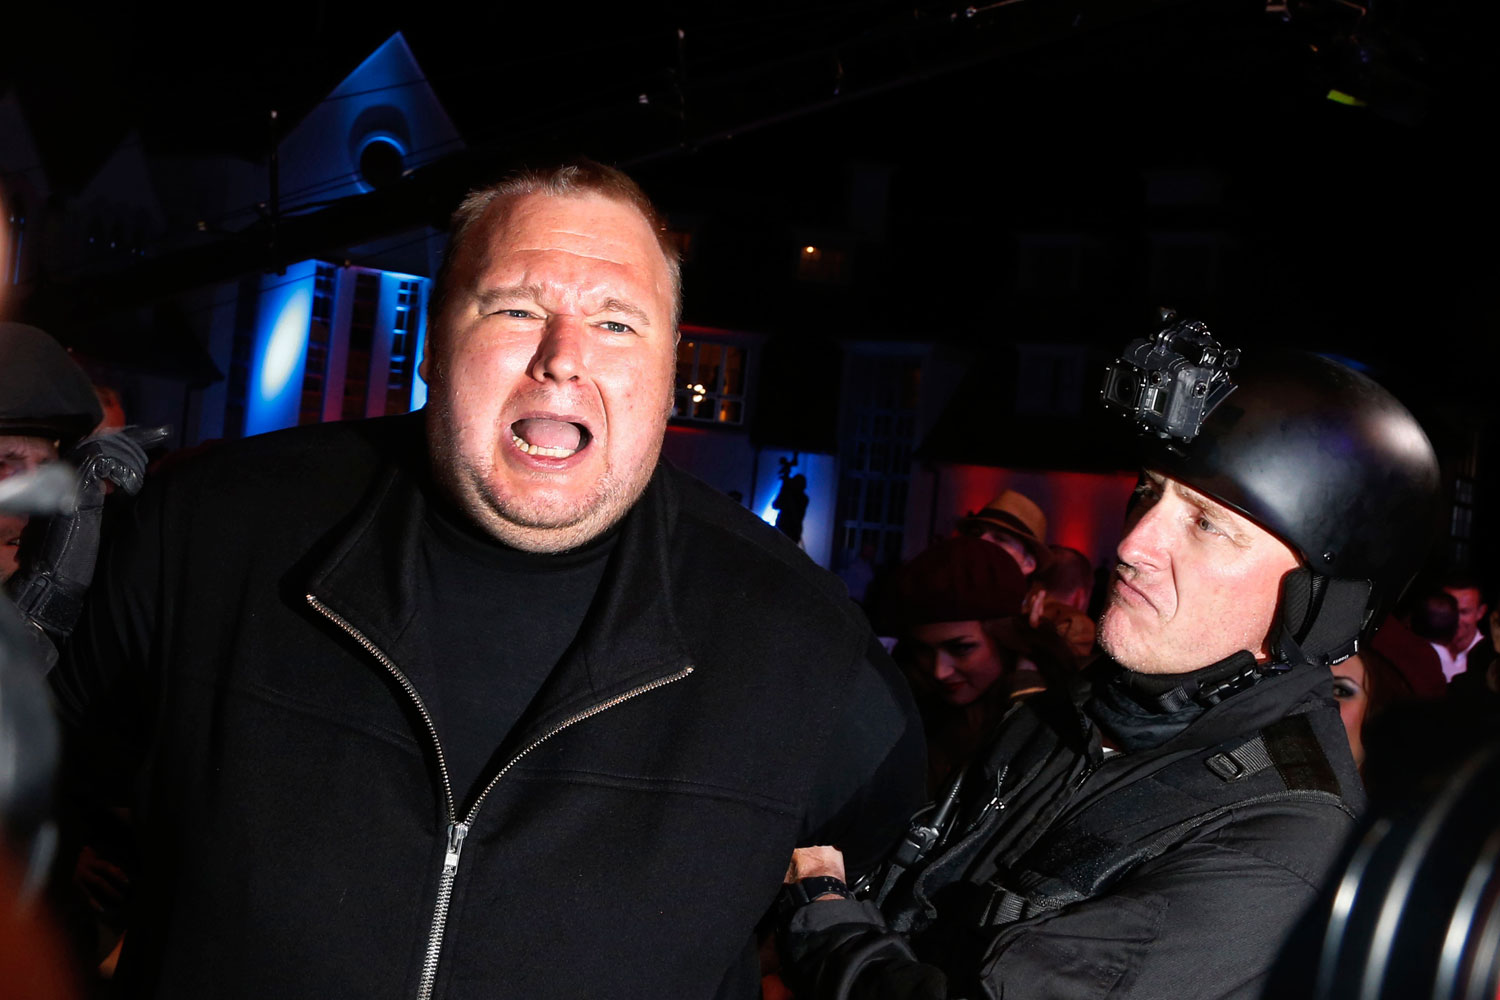 An actor in police costume mock-arrests Megaupload founder Kim Dotcom, left, as he launches his new file sharing site "Mega" in Auckland Jan. 20, 2013. (Nigel Marple—Reuters)